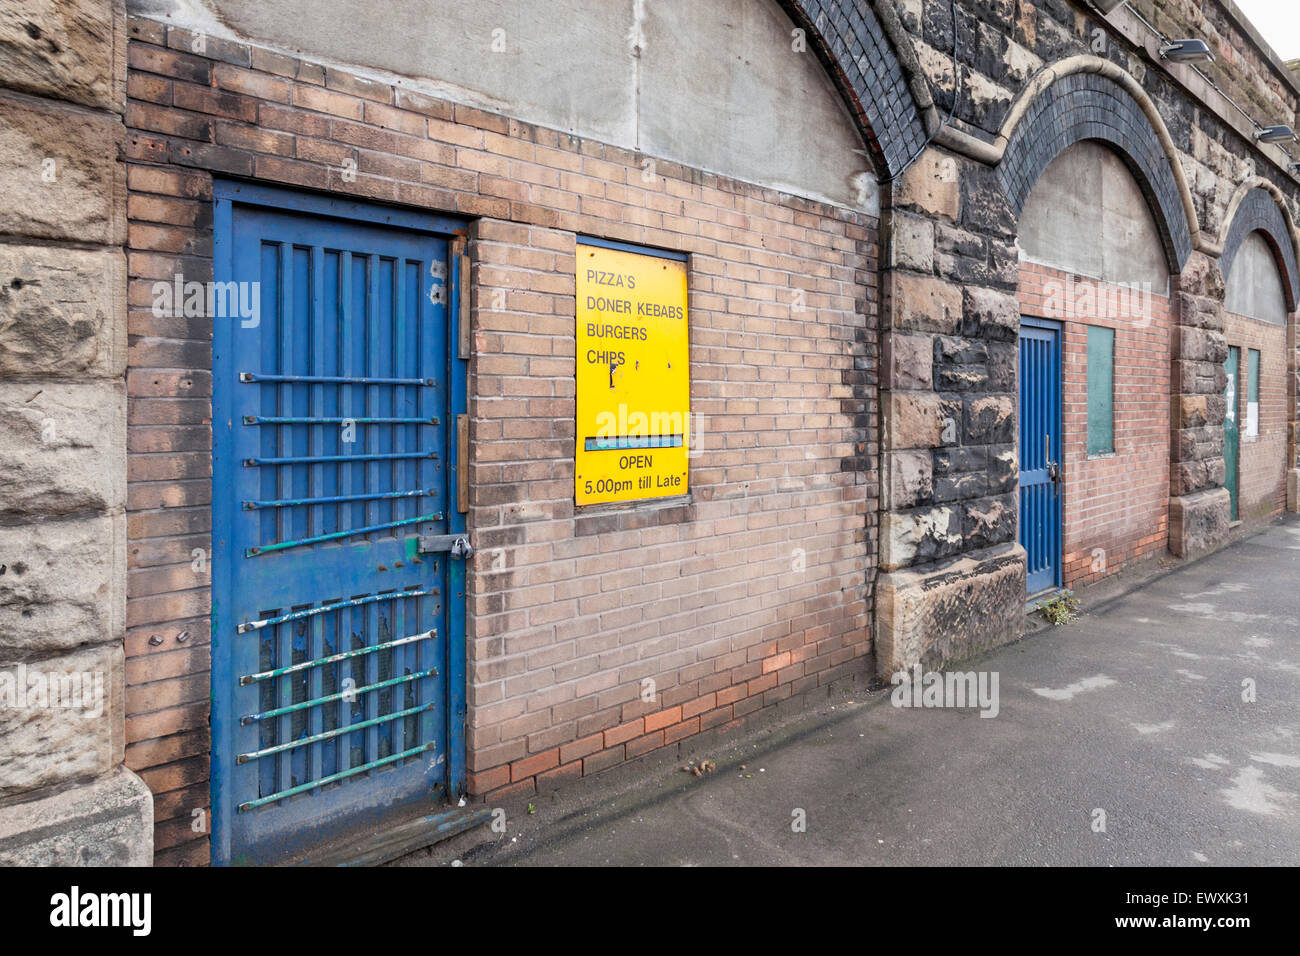 Businesses built into railway arches, Sheffield, England, UK Stock Photo